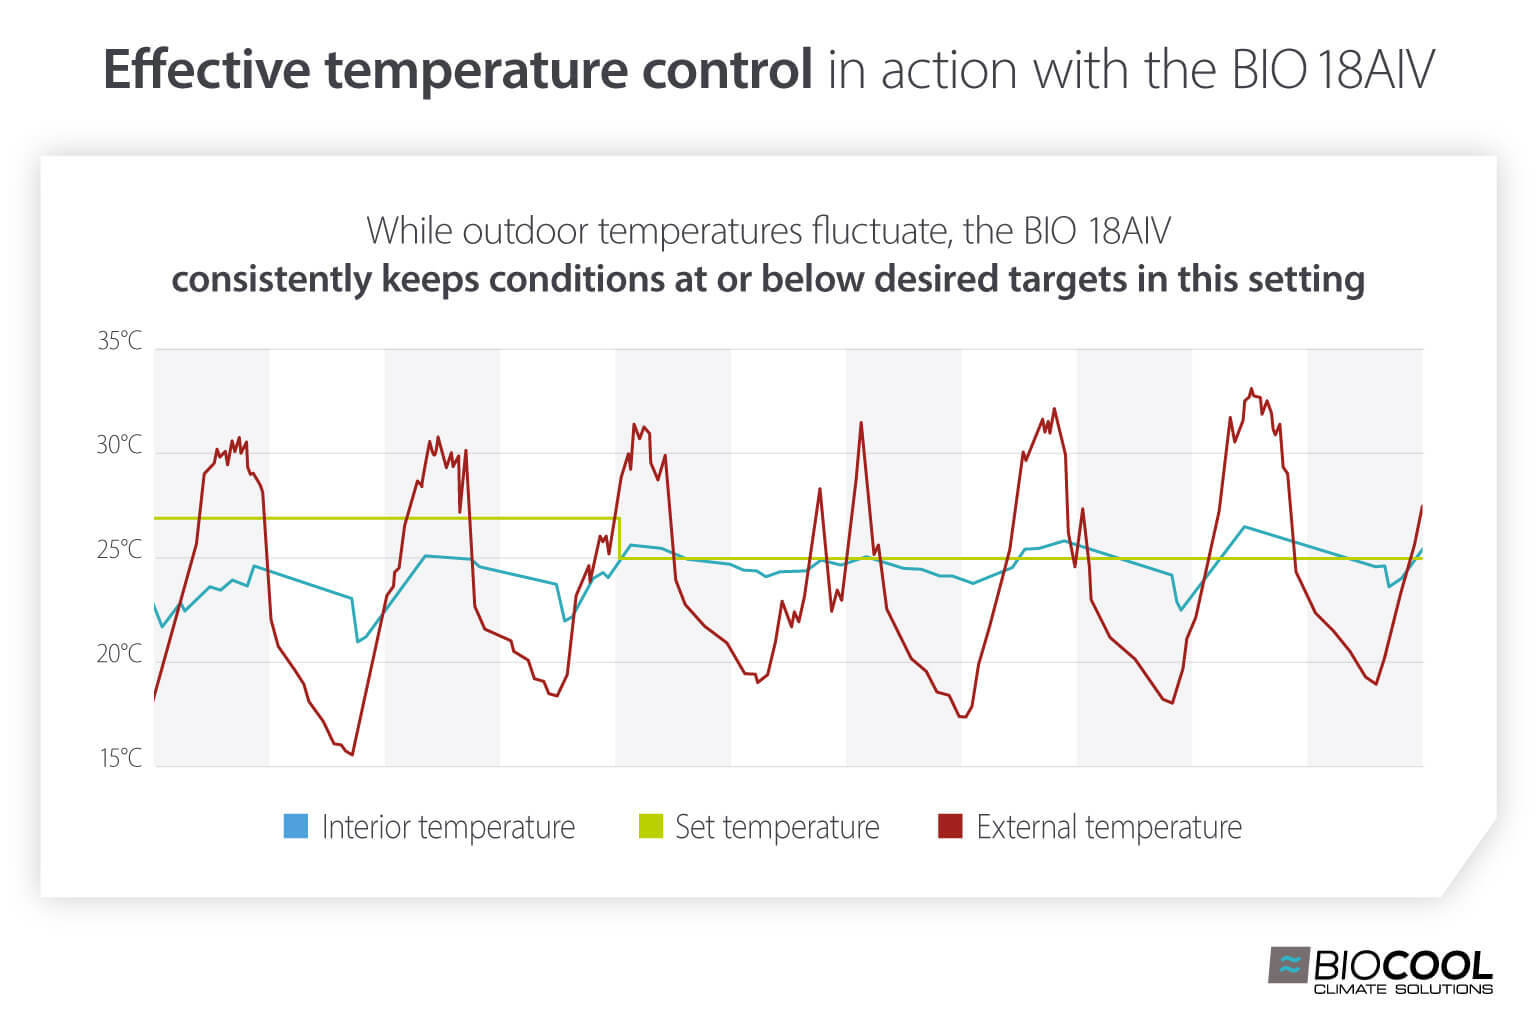 Chart showing how BIO 18AIV evaporative cooler maintained consistent indoor temperatures despite changing outdoor conditions - Biocool infographic image